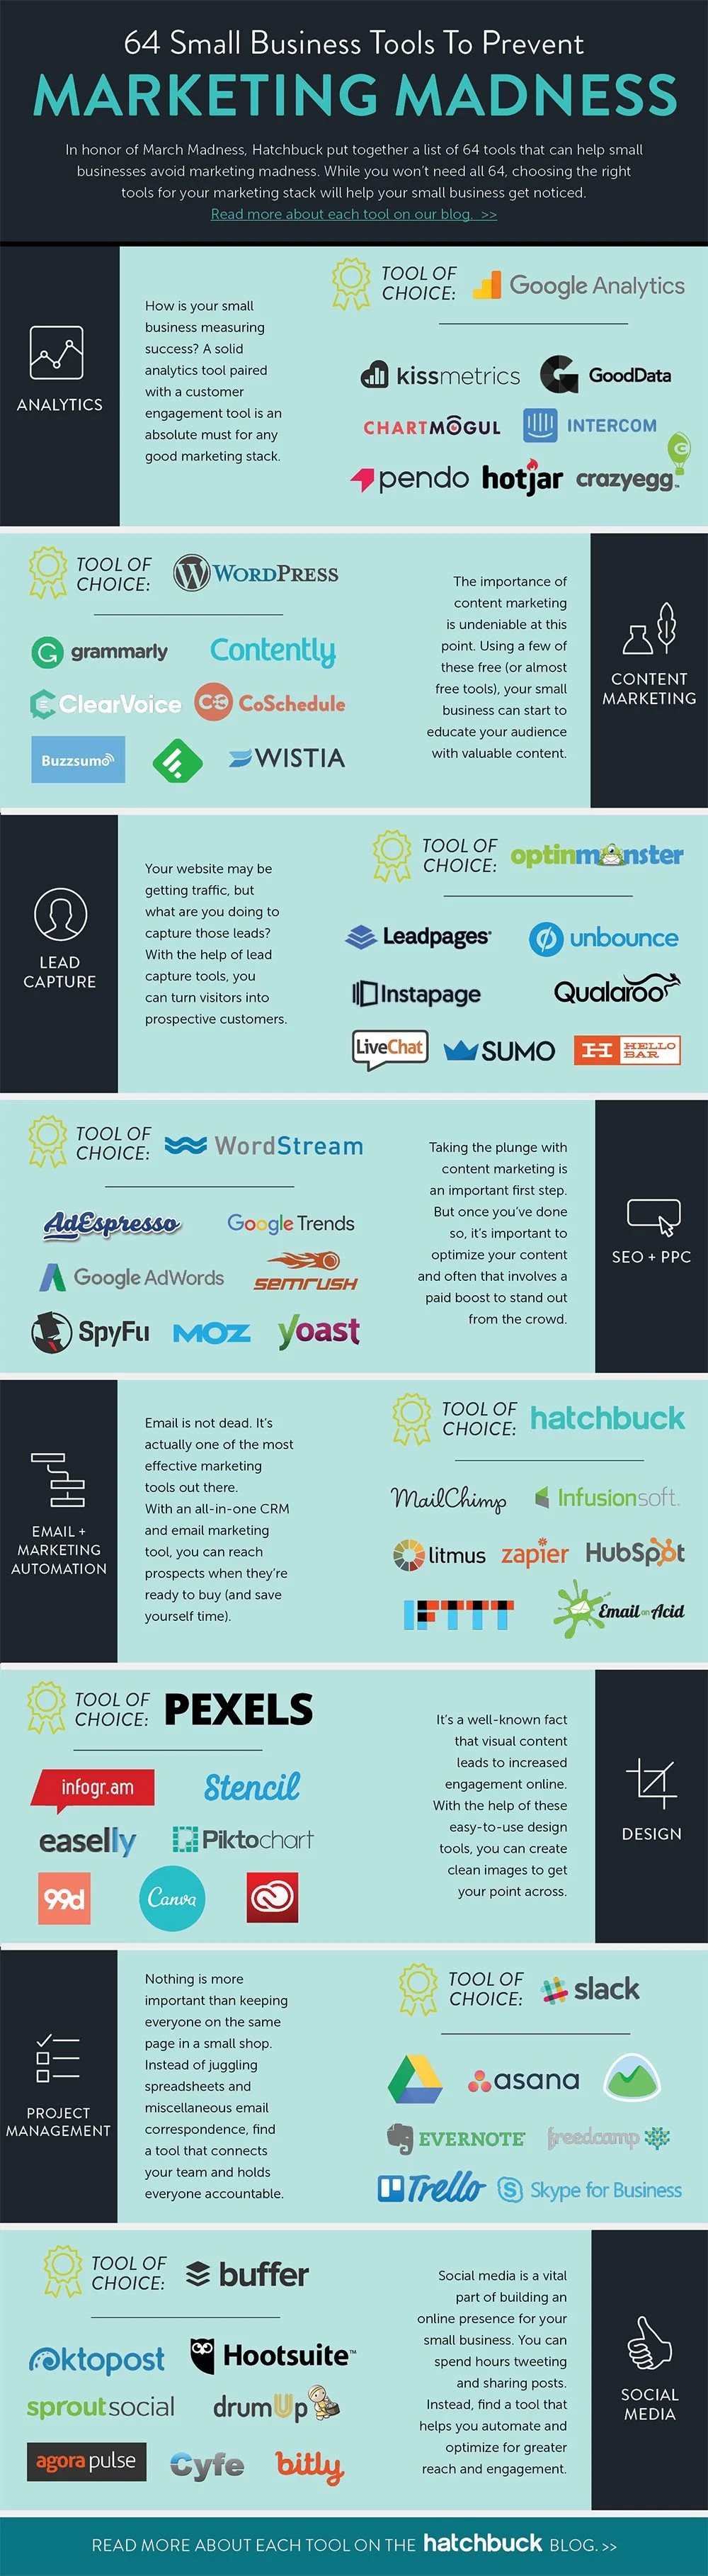 64 Affordable Small Business Marketing Tools You’d be Mad Not to Try - #Infographic